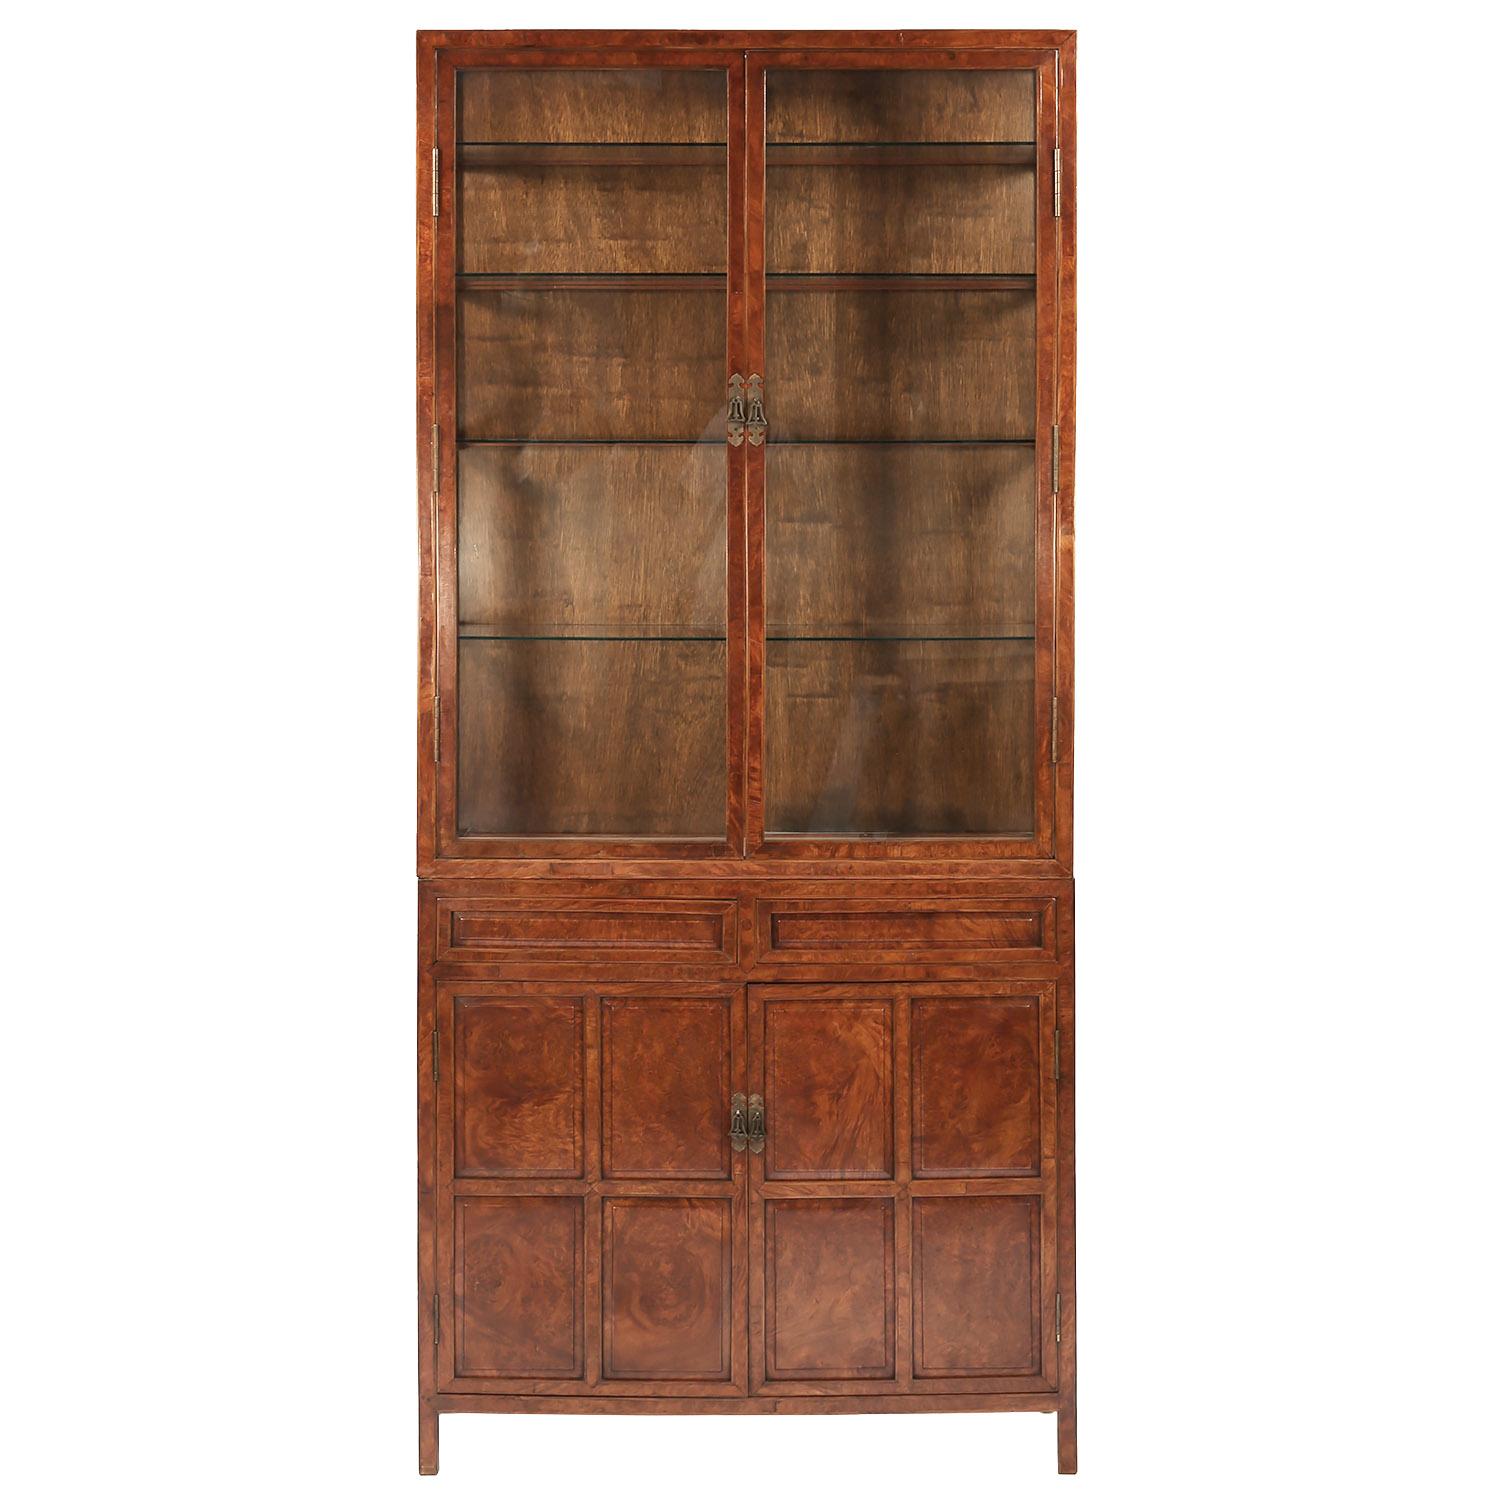 Mid-20th century Chinese lighted burl wood and glass tall two-piece cabinet

The top cabinet has two glass doors, glass sides and four glass shelves. The lower cabinet has two burl wood fronted drawers above two burl wood fronted doors behind